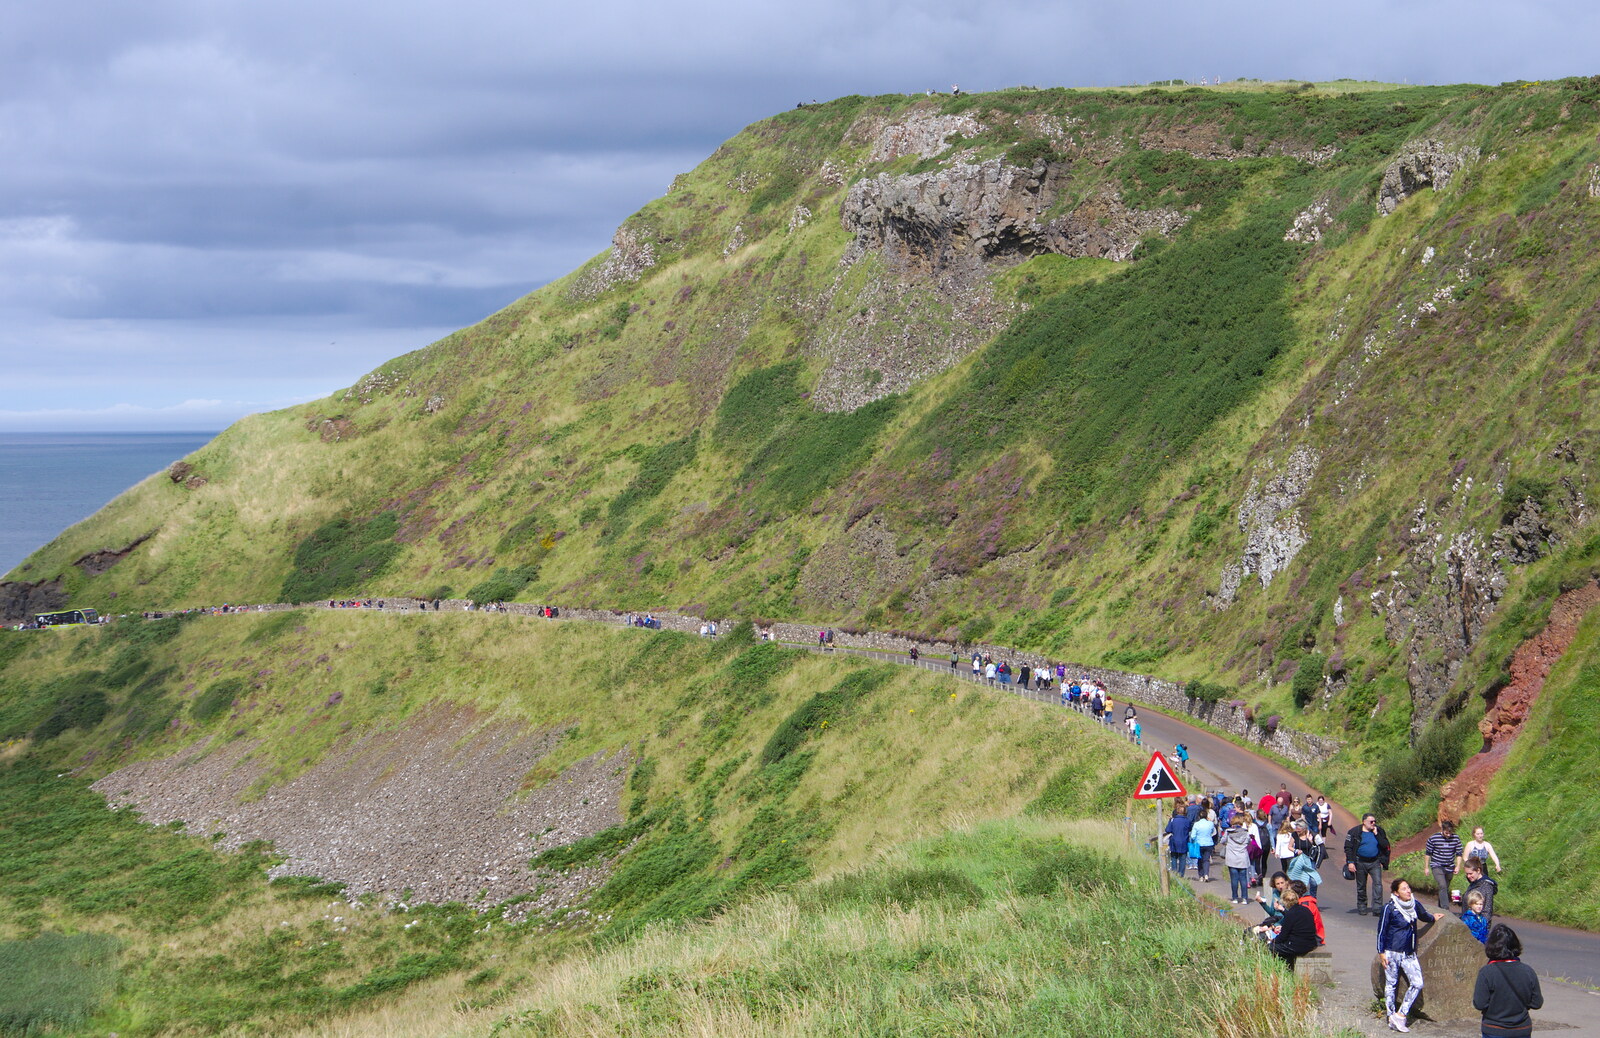 There's a stream of people coming and going from The Giant's Causeway, Bushmills, County Antrim, Northern Ireland - 14th August 2019